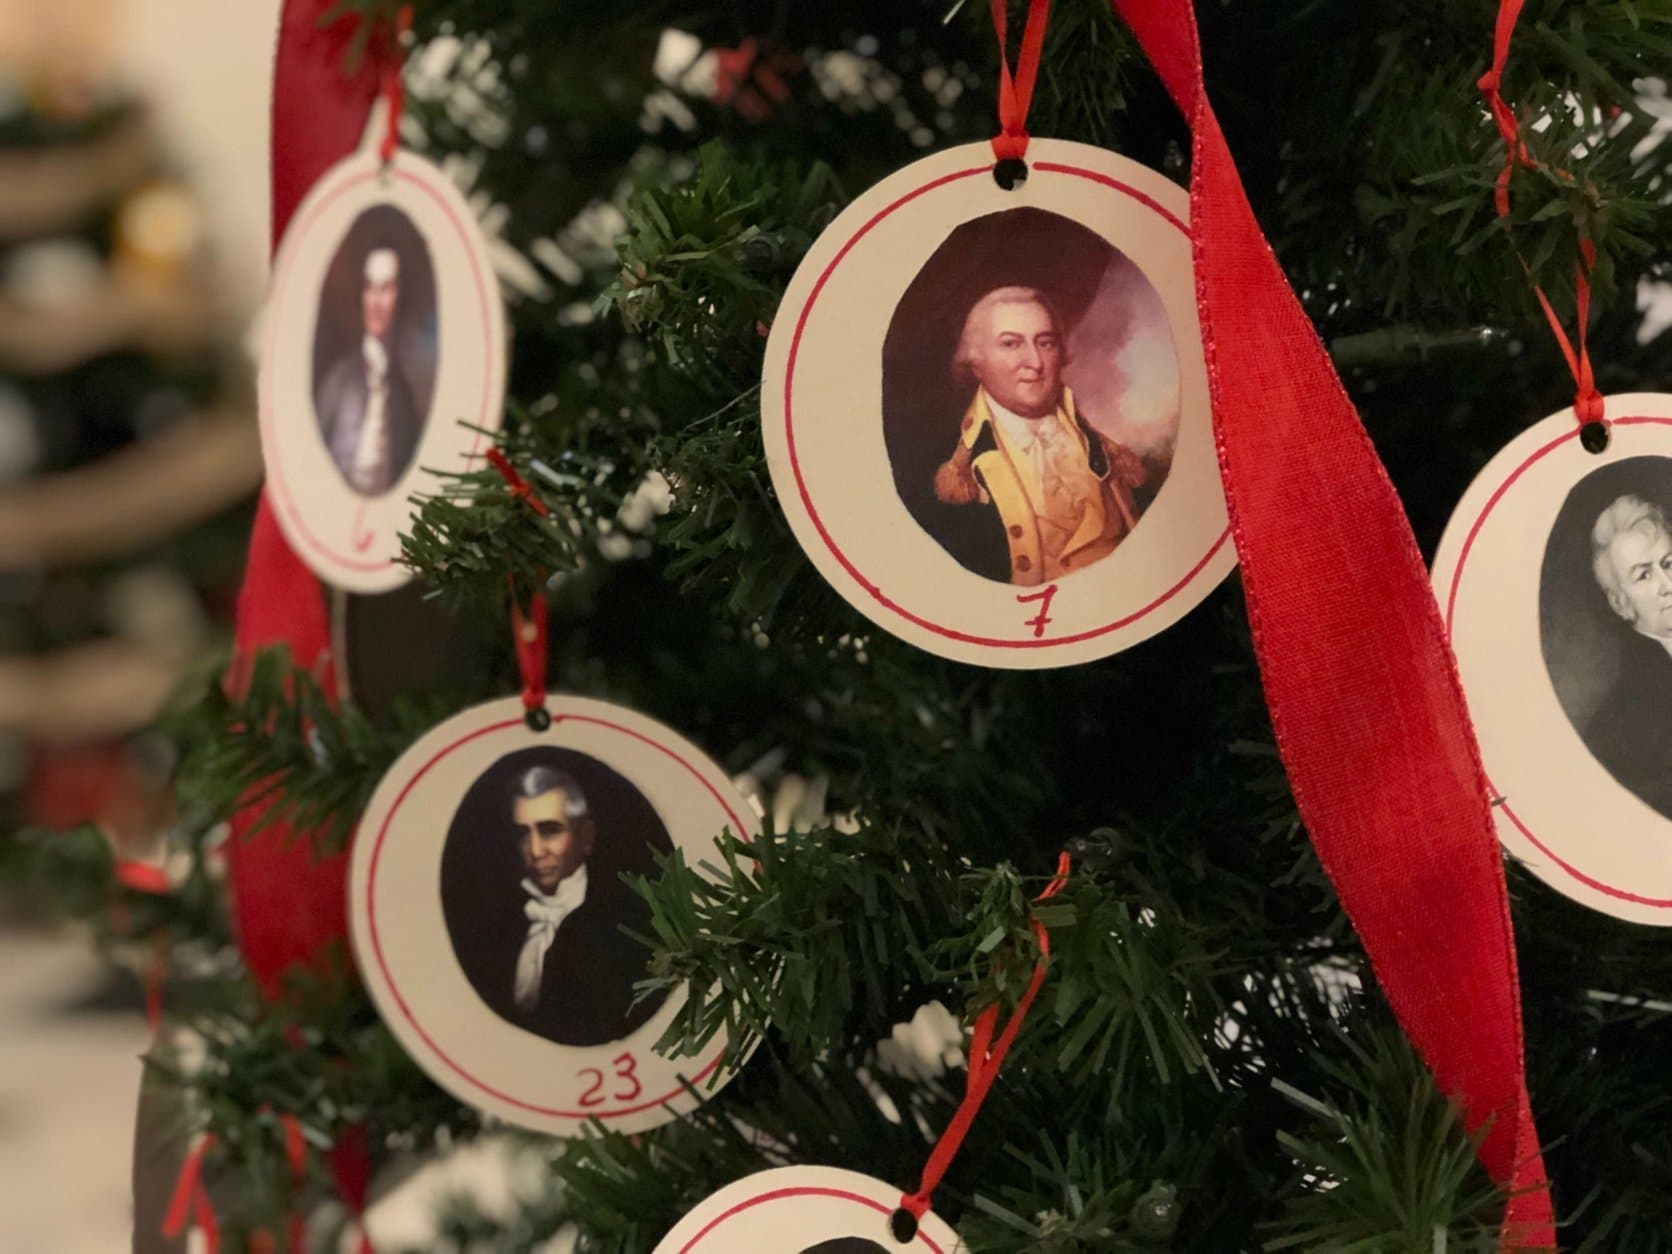 The governors of Maryland are featured on this tree decorated by the Chestertown Garden Club, part of a display of Christmas trees on view at the Maryland State House in Annapolis, Md. (WTOP/Kate Ryan)